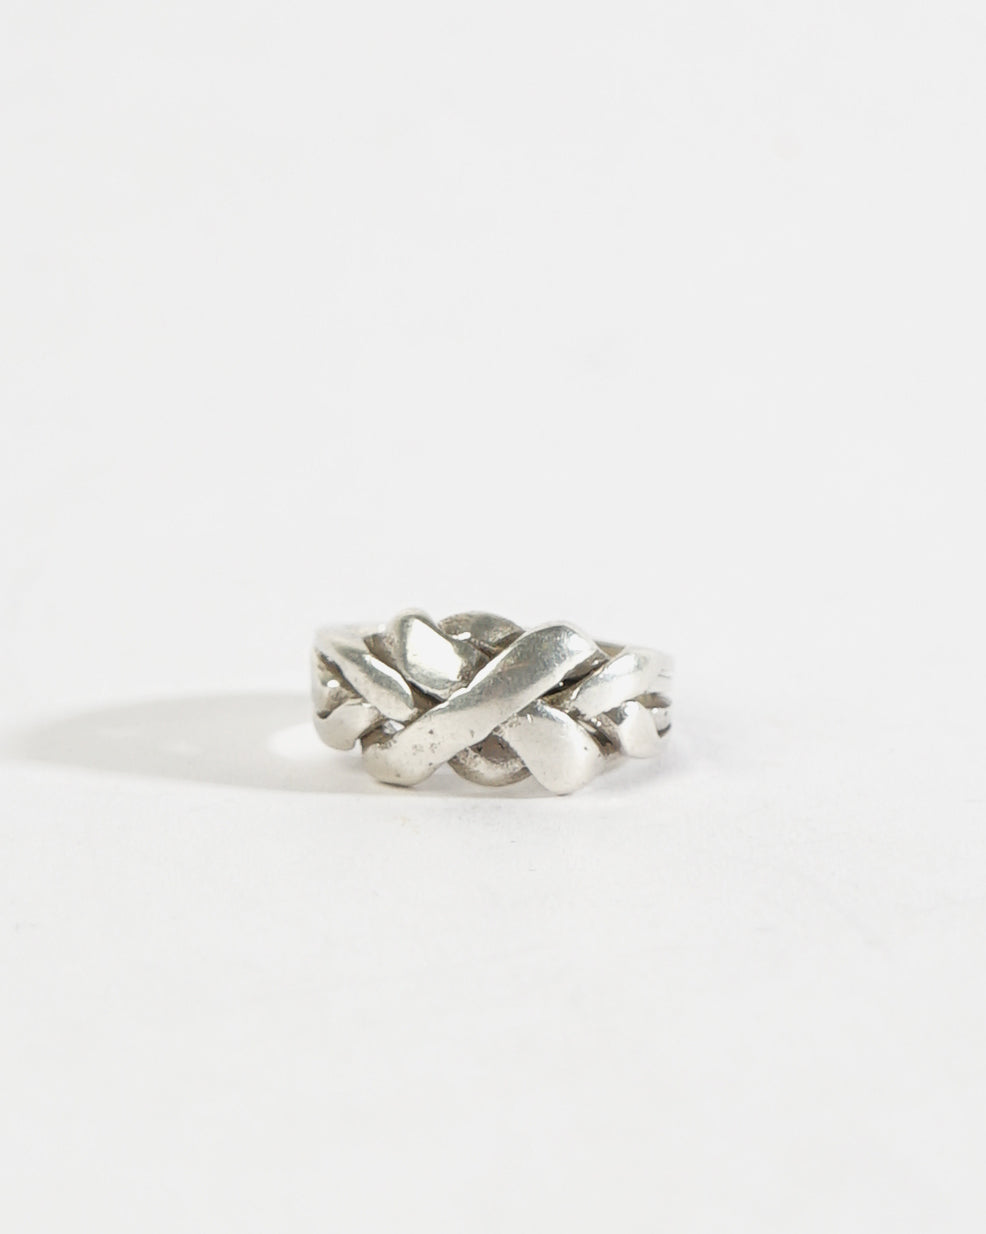 Silver Puzzle Ring / size: 8